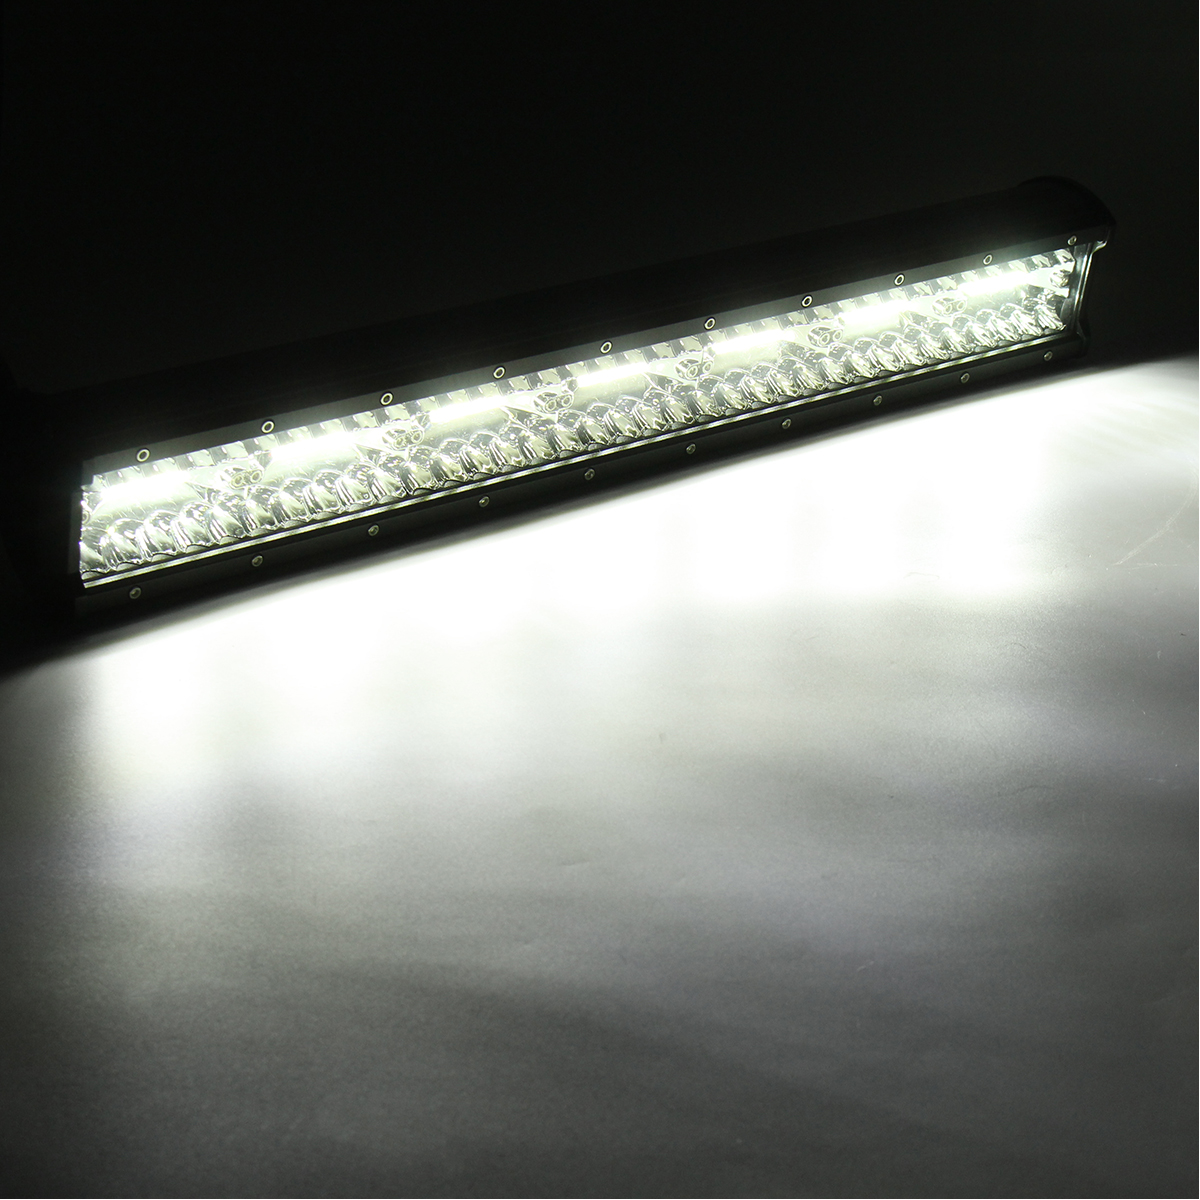 20Inch 420W Tri Row LED Work Light Bars Combo Beam IP68 Waterproof White for 0-30V off Road SUV Trailer Vehicle